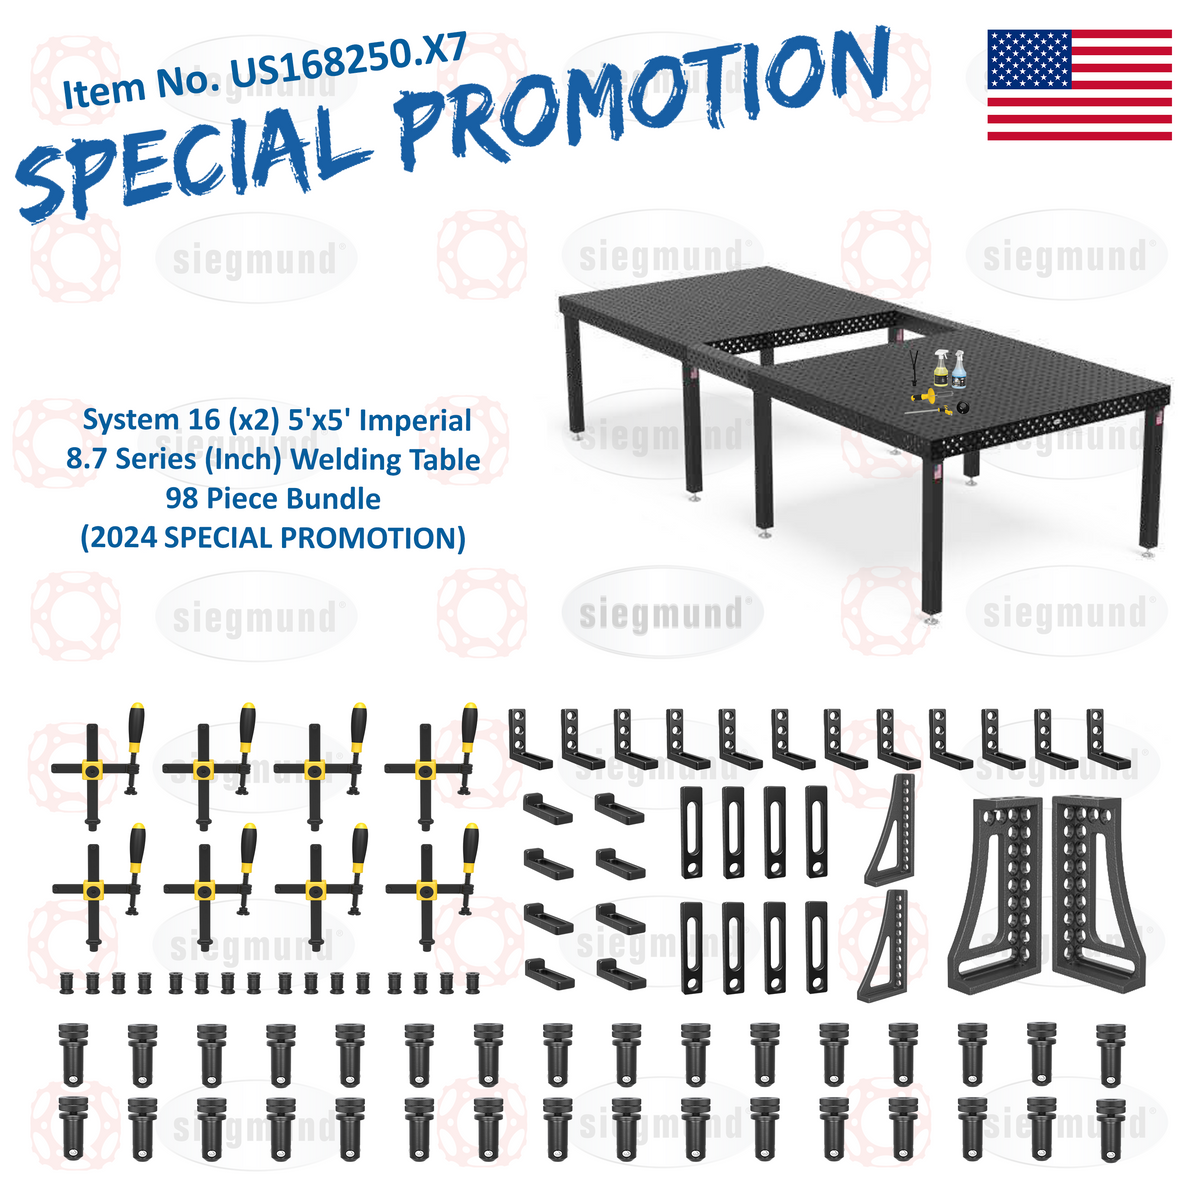 US168250.X7: System 16 (x2) 5'x5' (60"x60") Imperial 8.7 Series (Inch) Welding Table 98 Piece Bundle (2024 SPECIAL PROMOTION)